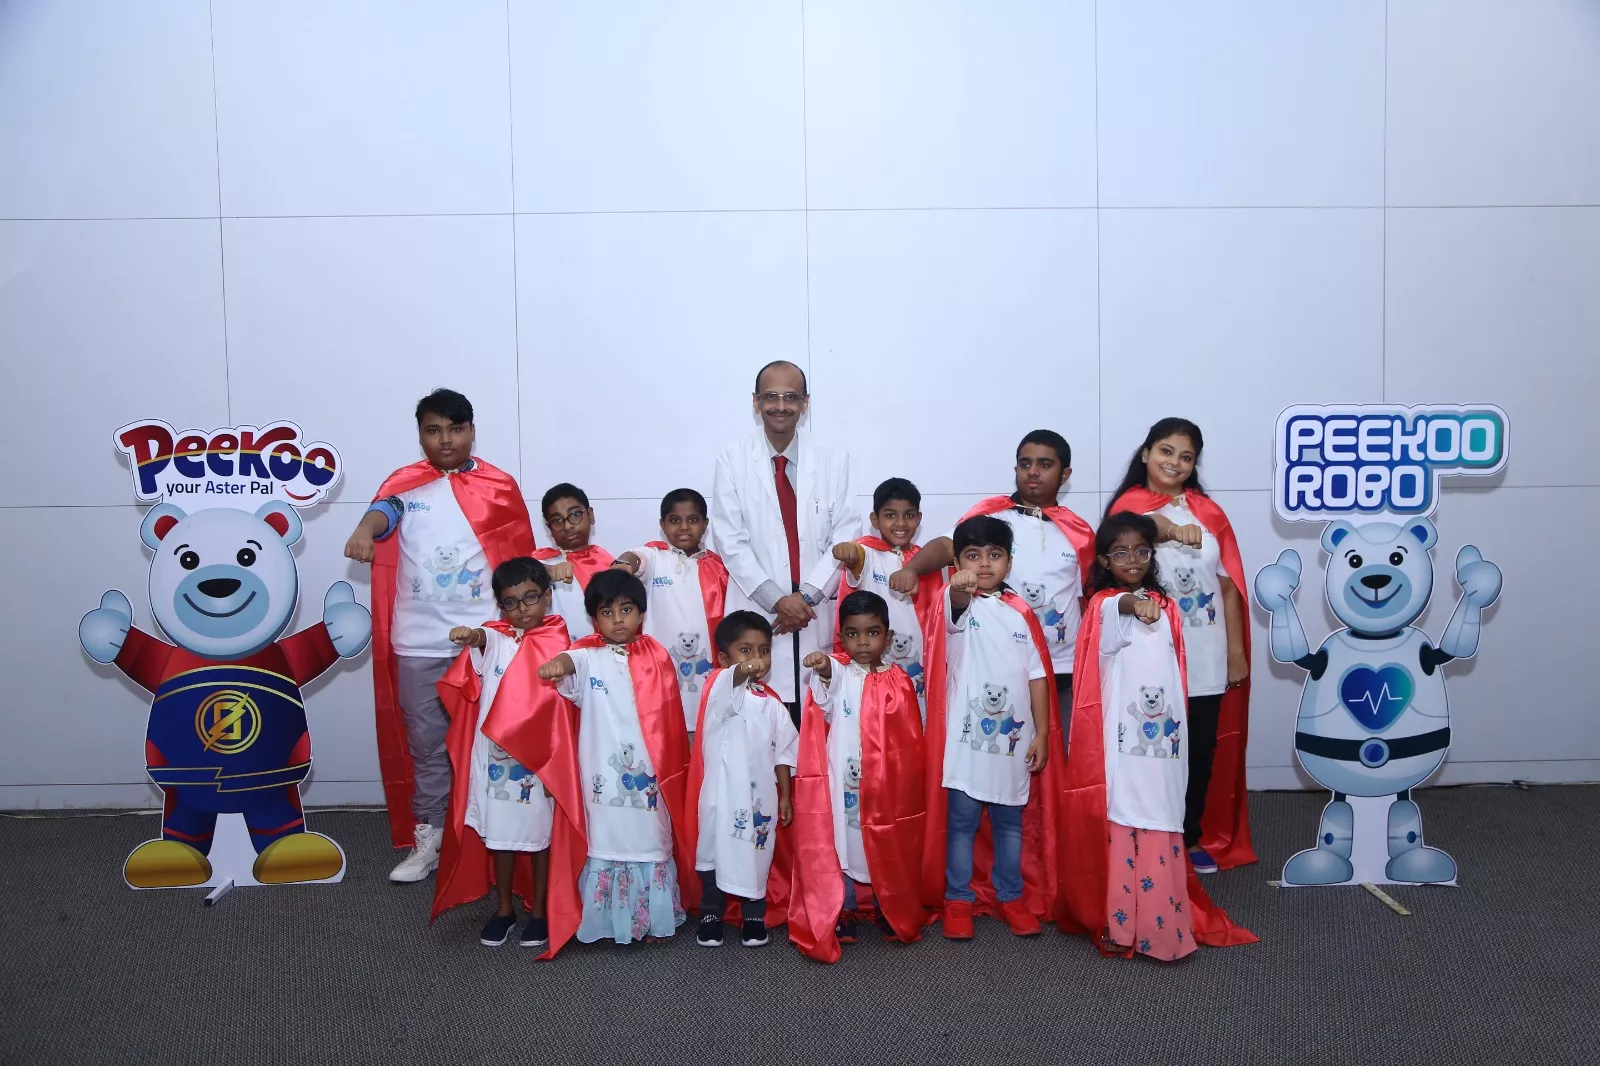 Aster Medcity celebrates a get-together of Pediatric kidney transplantees and launch of PeeKoo